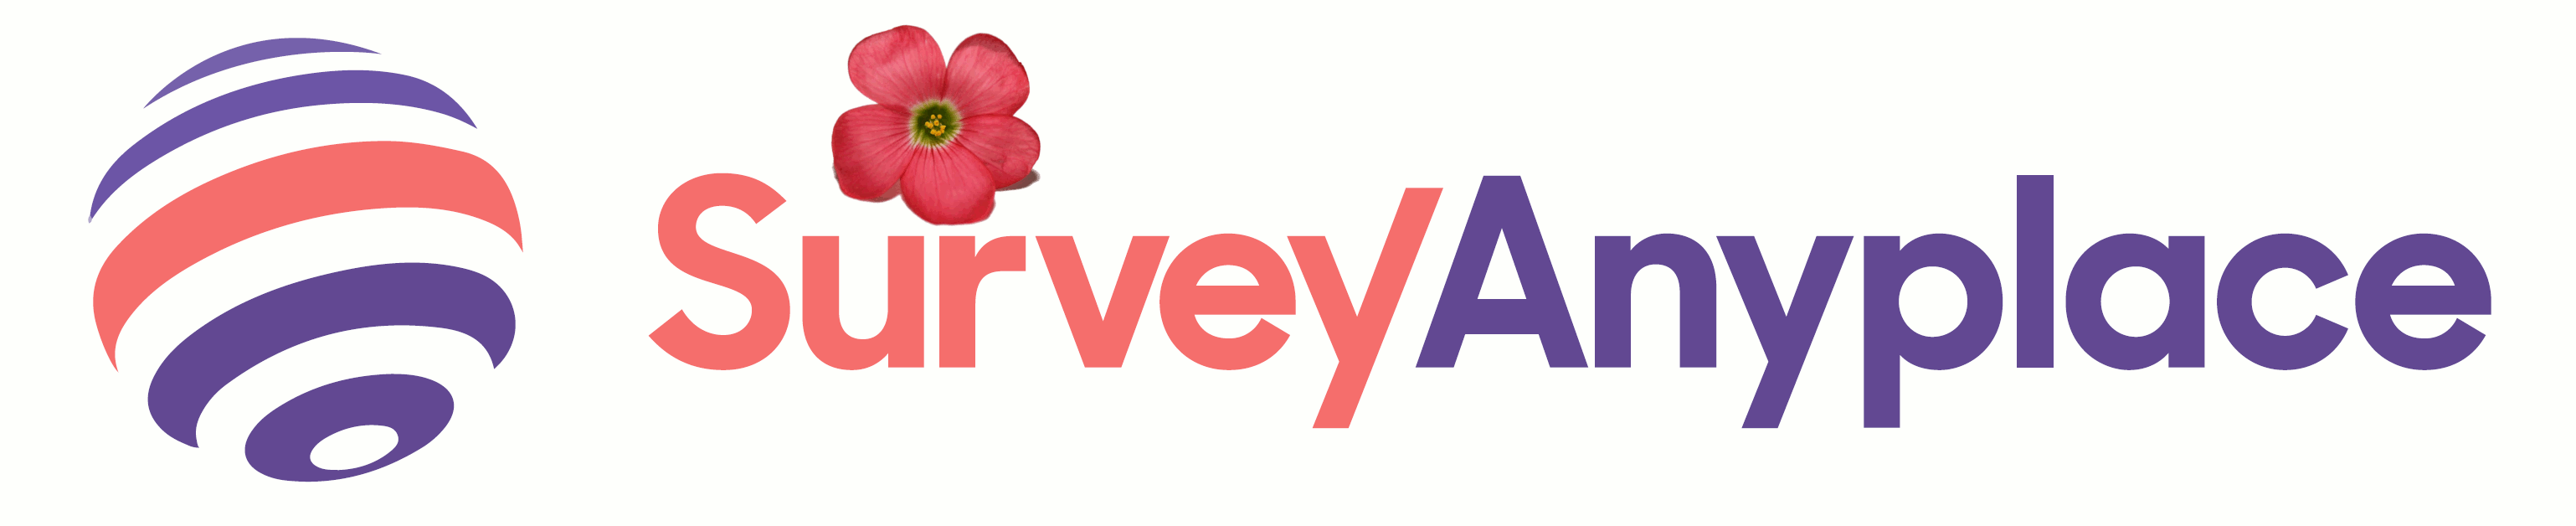 Survey Anyplace logo moving flower